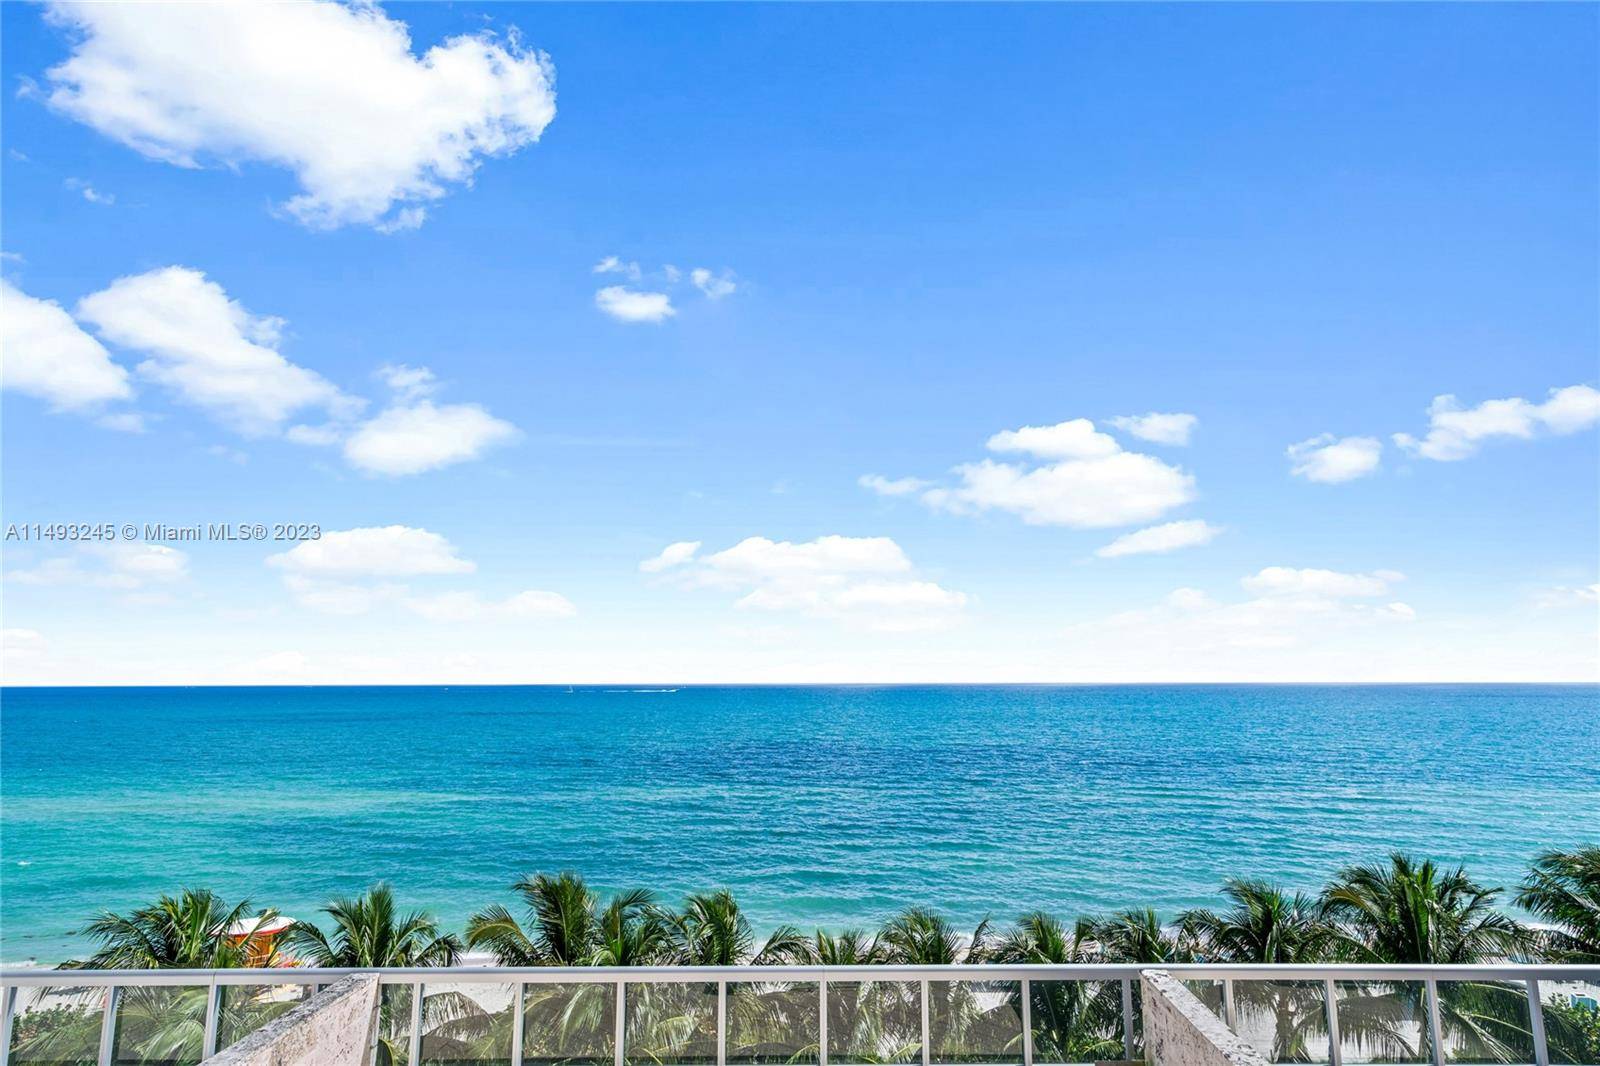 Enjoy gorgeous direct ocean views from this fully furnished 3 bedroom, 3 bathroom flow through residence located in the exclusive Carillon North Tower in Miami Beach.